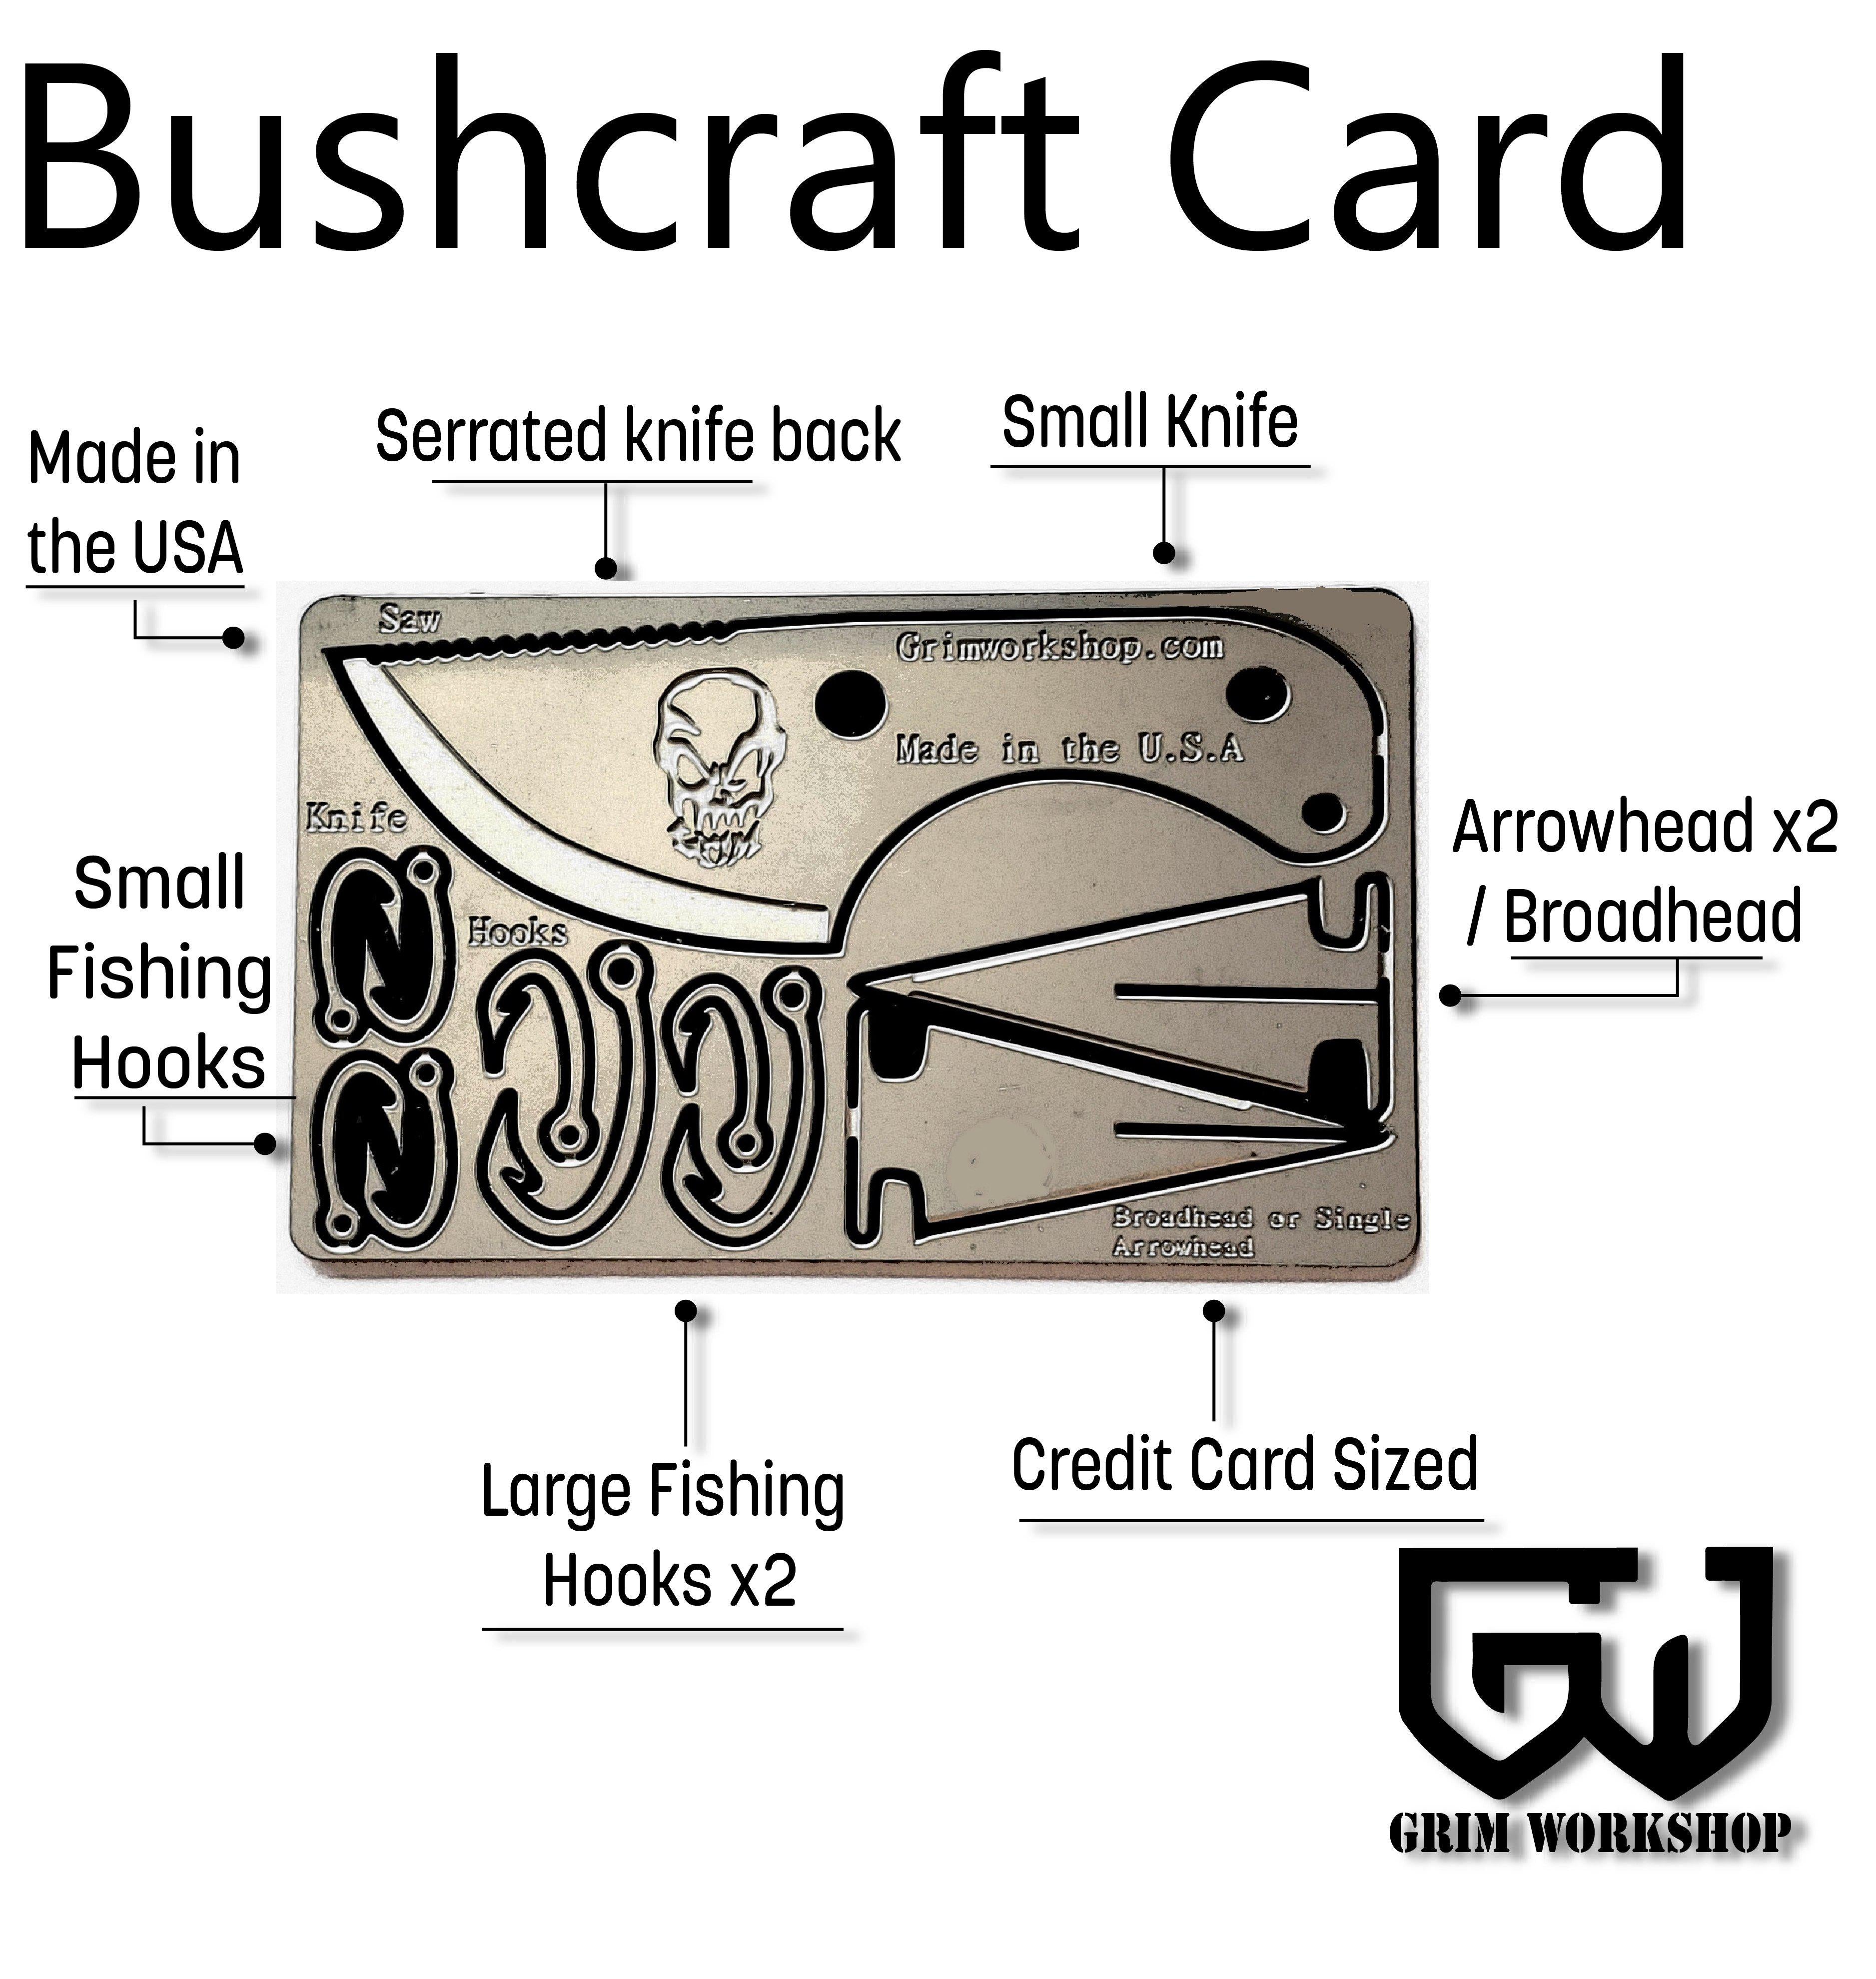 Bushcraft EDC Survival Card 11 function credit card survival tool and bushcraft edc kit. grim workshop creates the best credit card sized multi tool